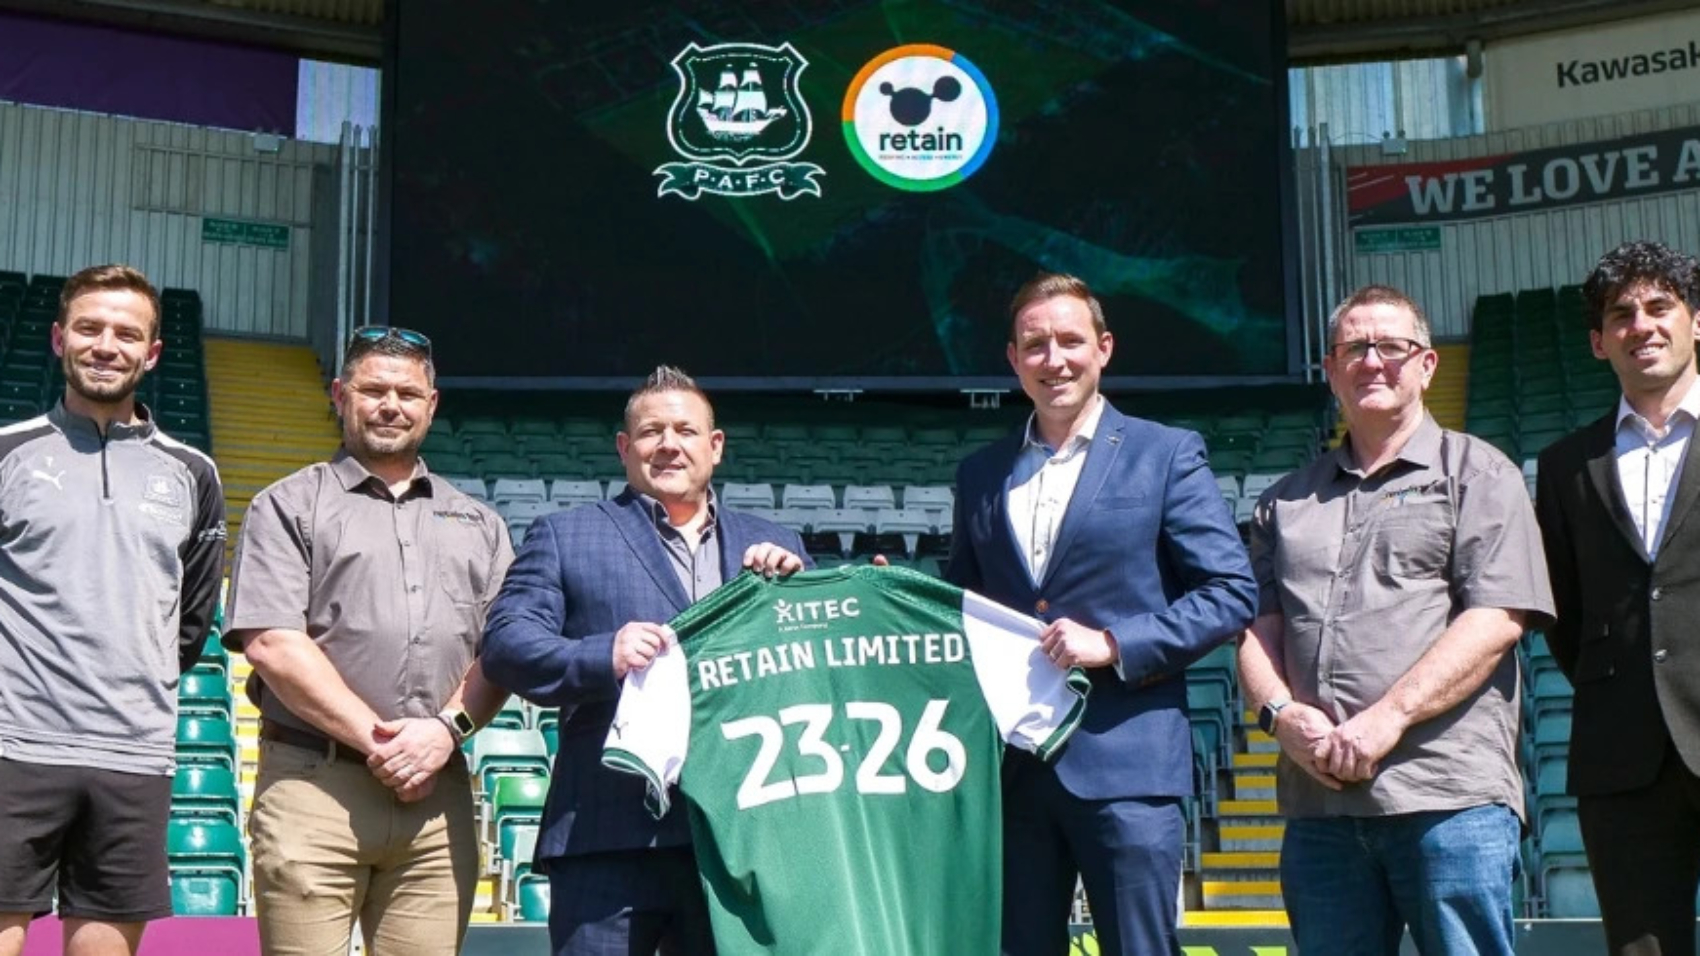 The directors of Retain are pictured with representatives of Plymouth Argyle to announce the shorts sponsorship